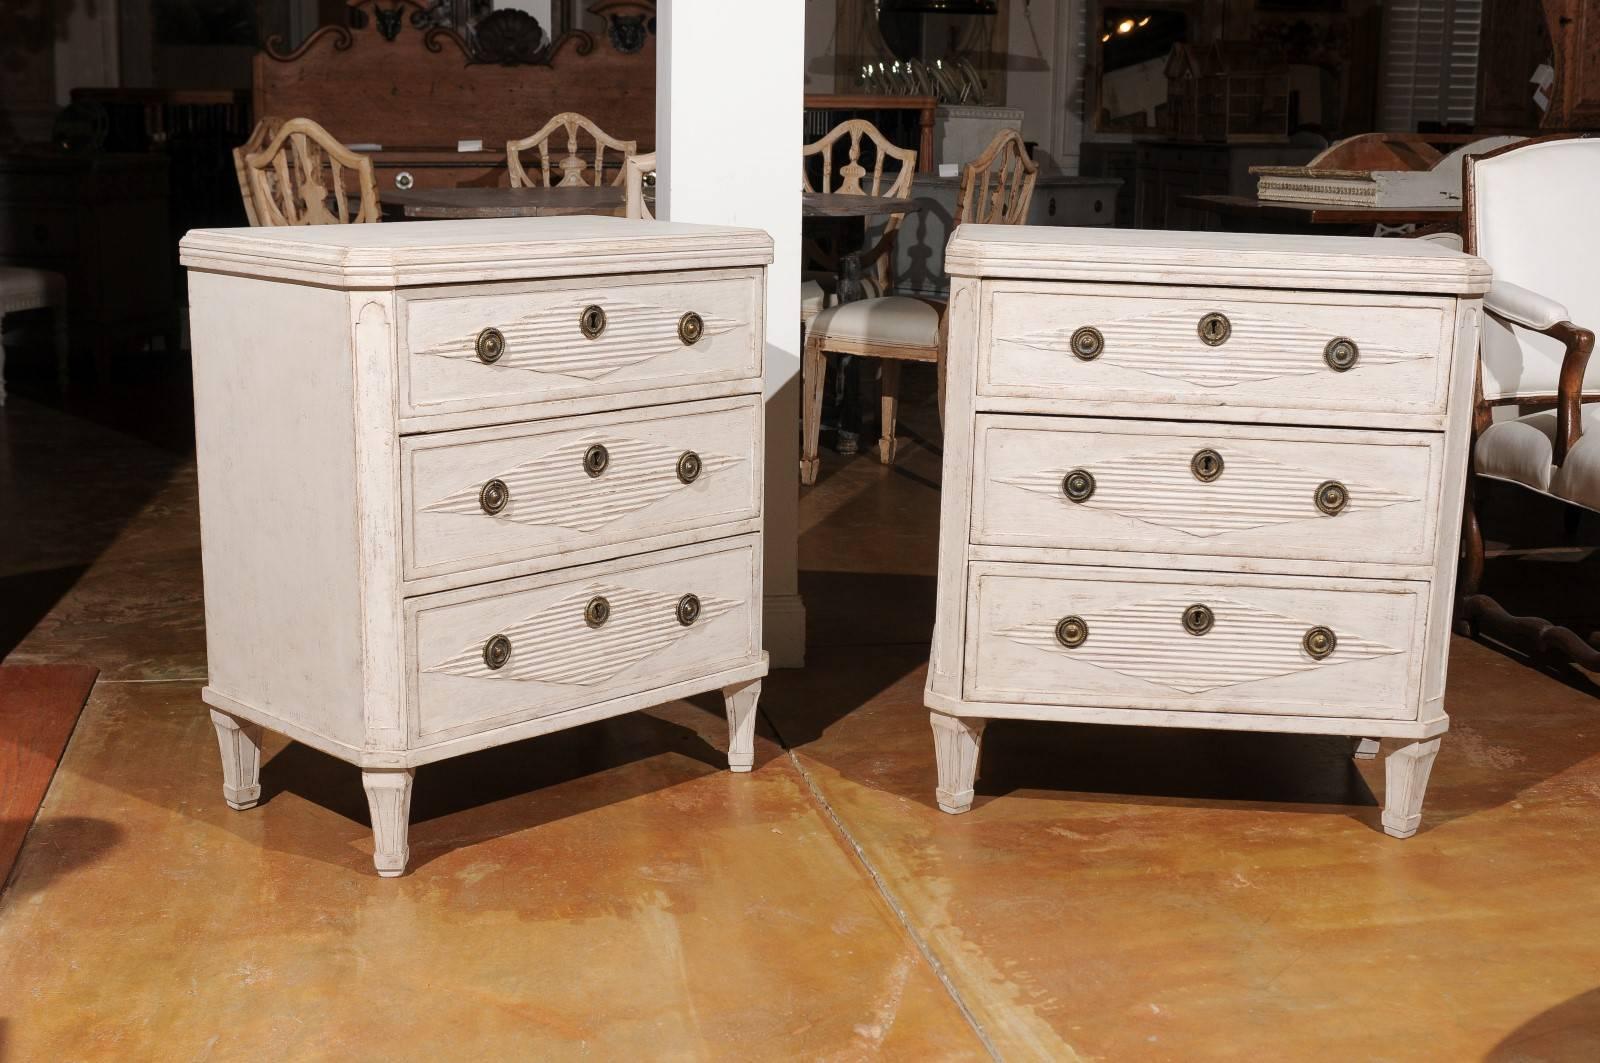 This pair of Swedish Gustavian three-drawer painted commodes from the mid-19th century features rectangular tops with canted corners in the front over three drawers each. The drawers are beautifully adorned with an elongated reeded diamond motif. A